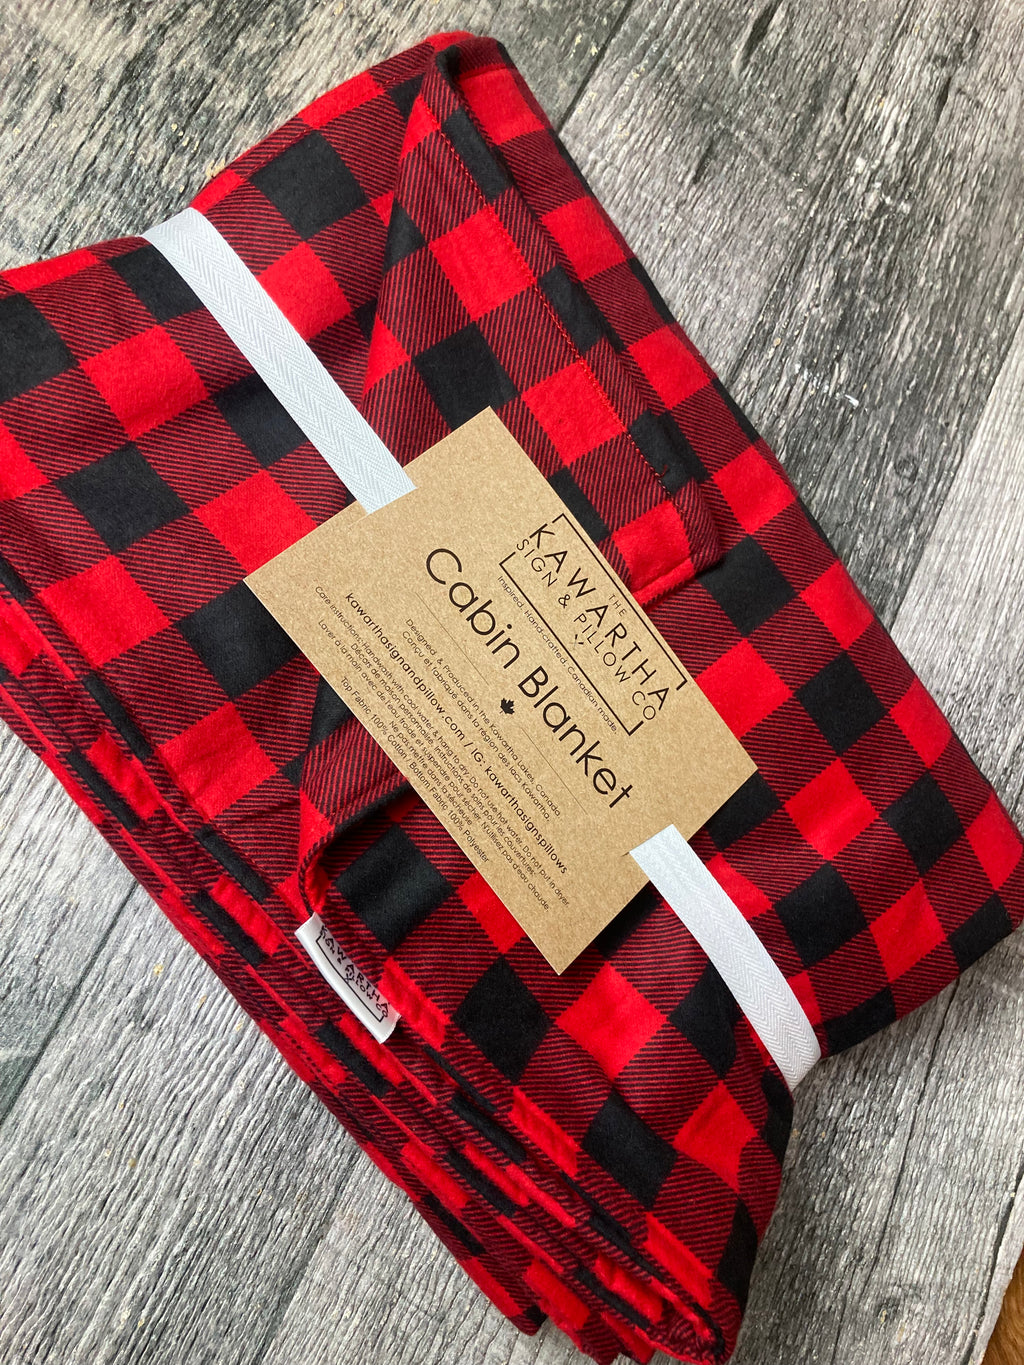 Cotton Buffalo Check Throw Blanket in Red and Black | cabin blanket